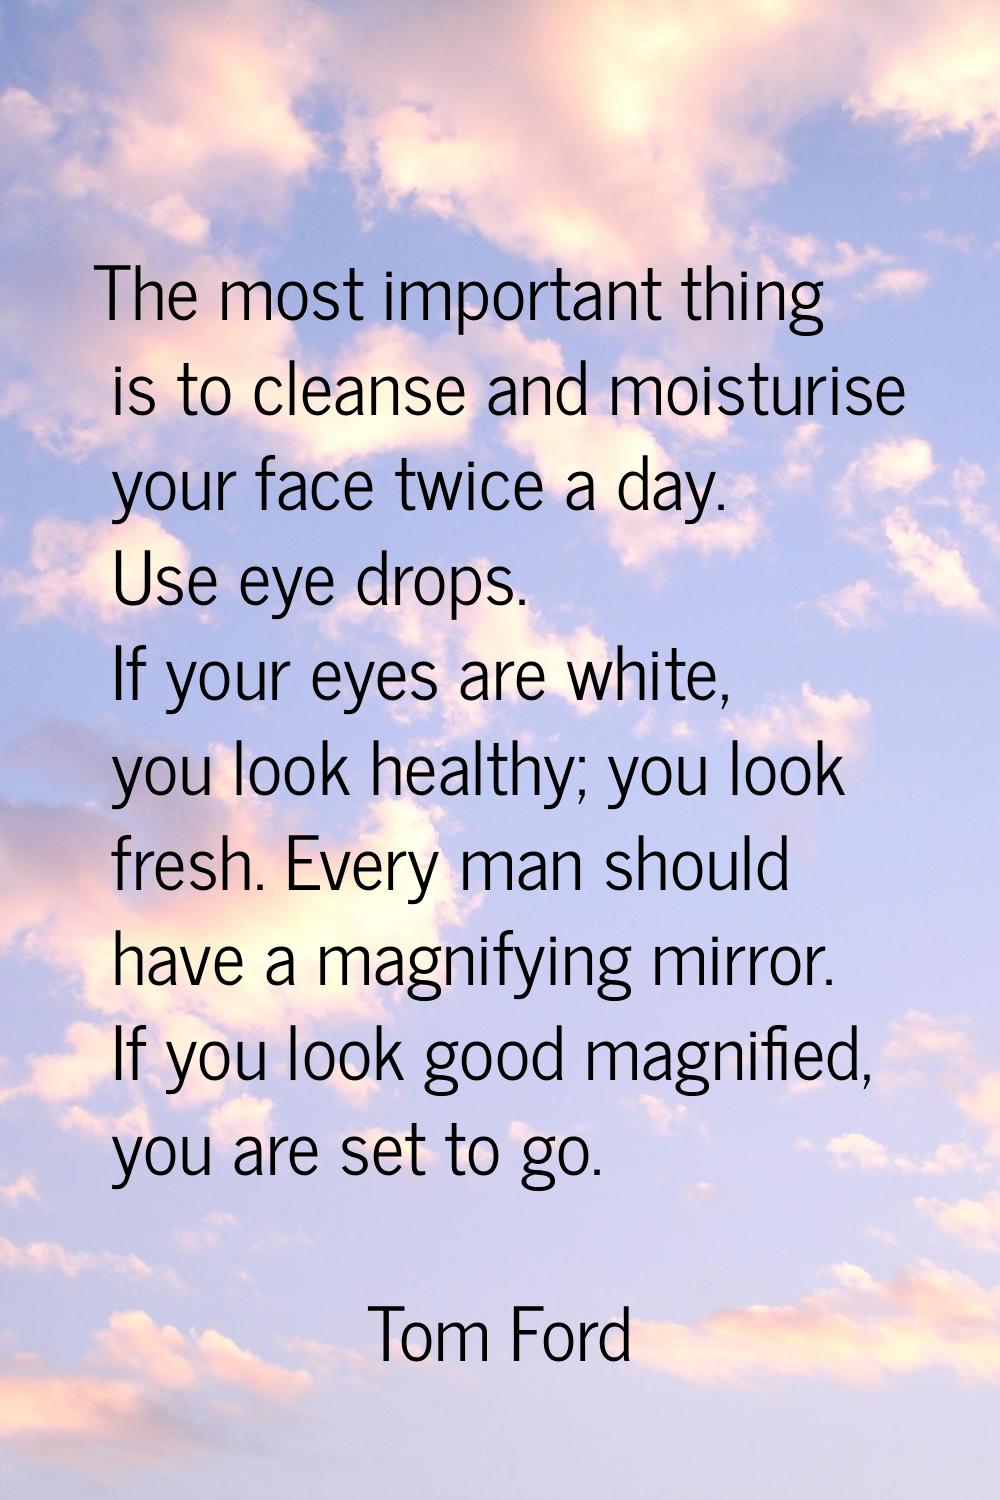 The most important thing is to cleanse and moisturise your face twice a day. Use eye drops. If your